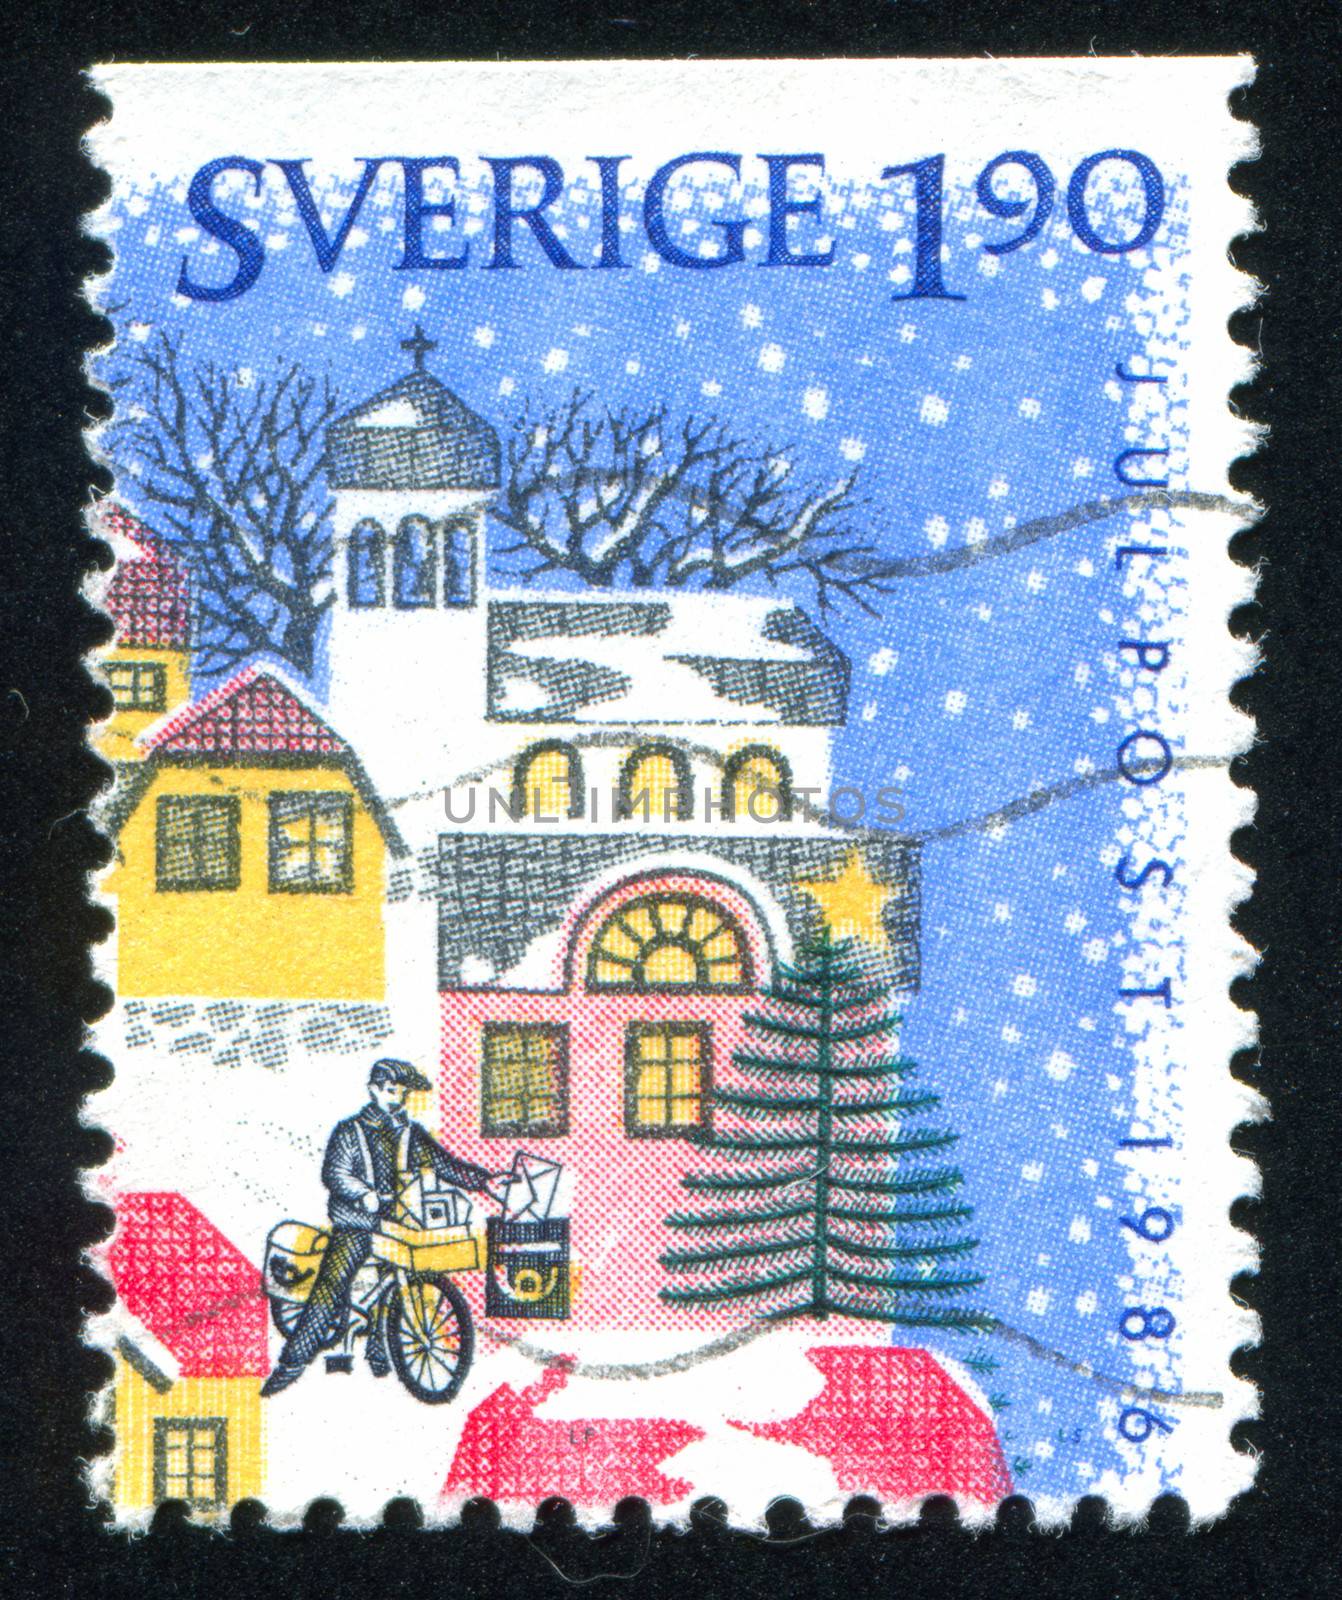 SWEDEN - CIRCA 1986: stamp printed by Sweden, shows Postman on bicycle, circa 1986